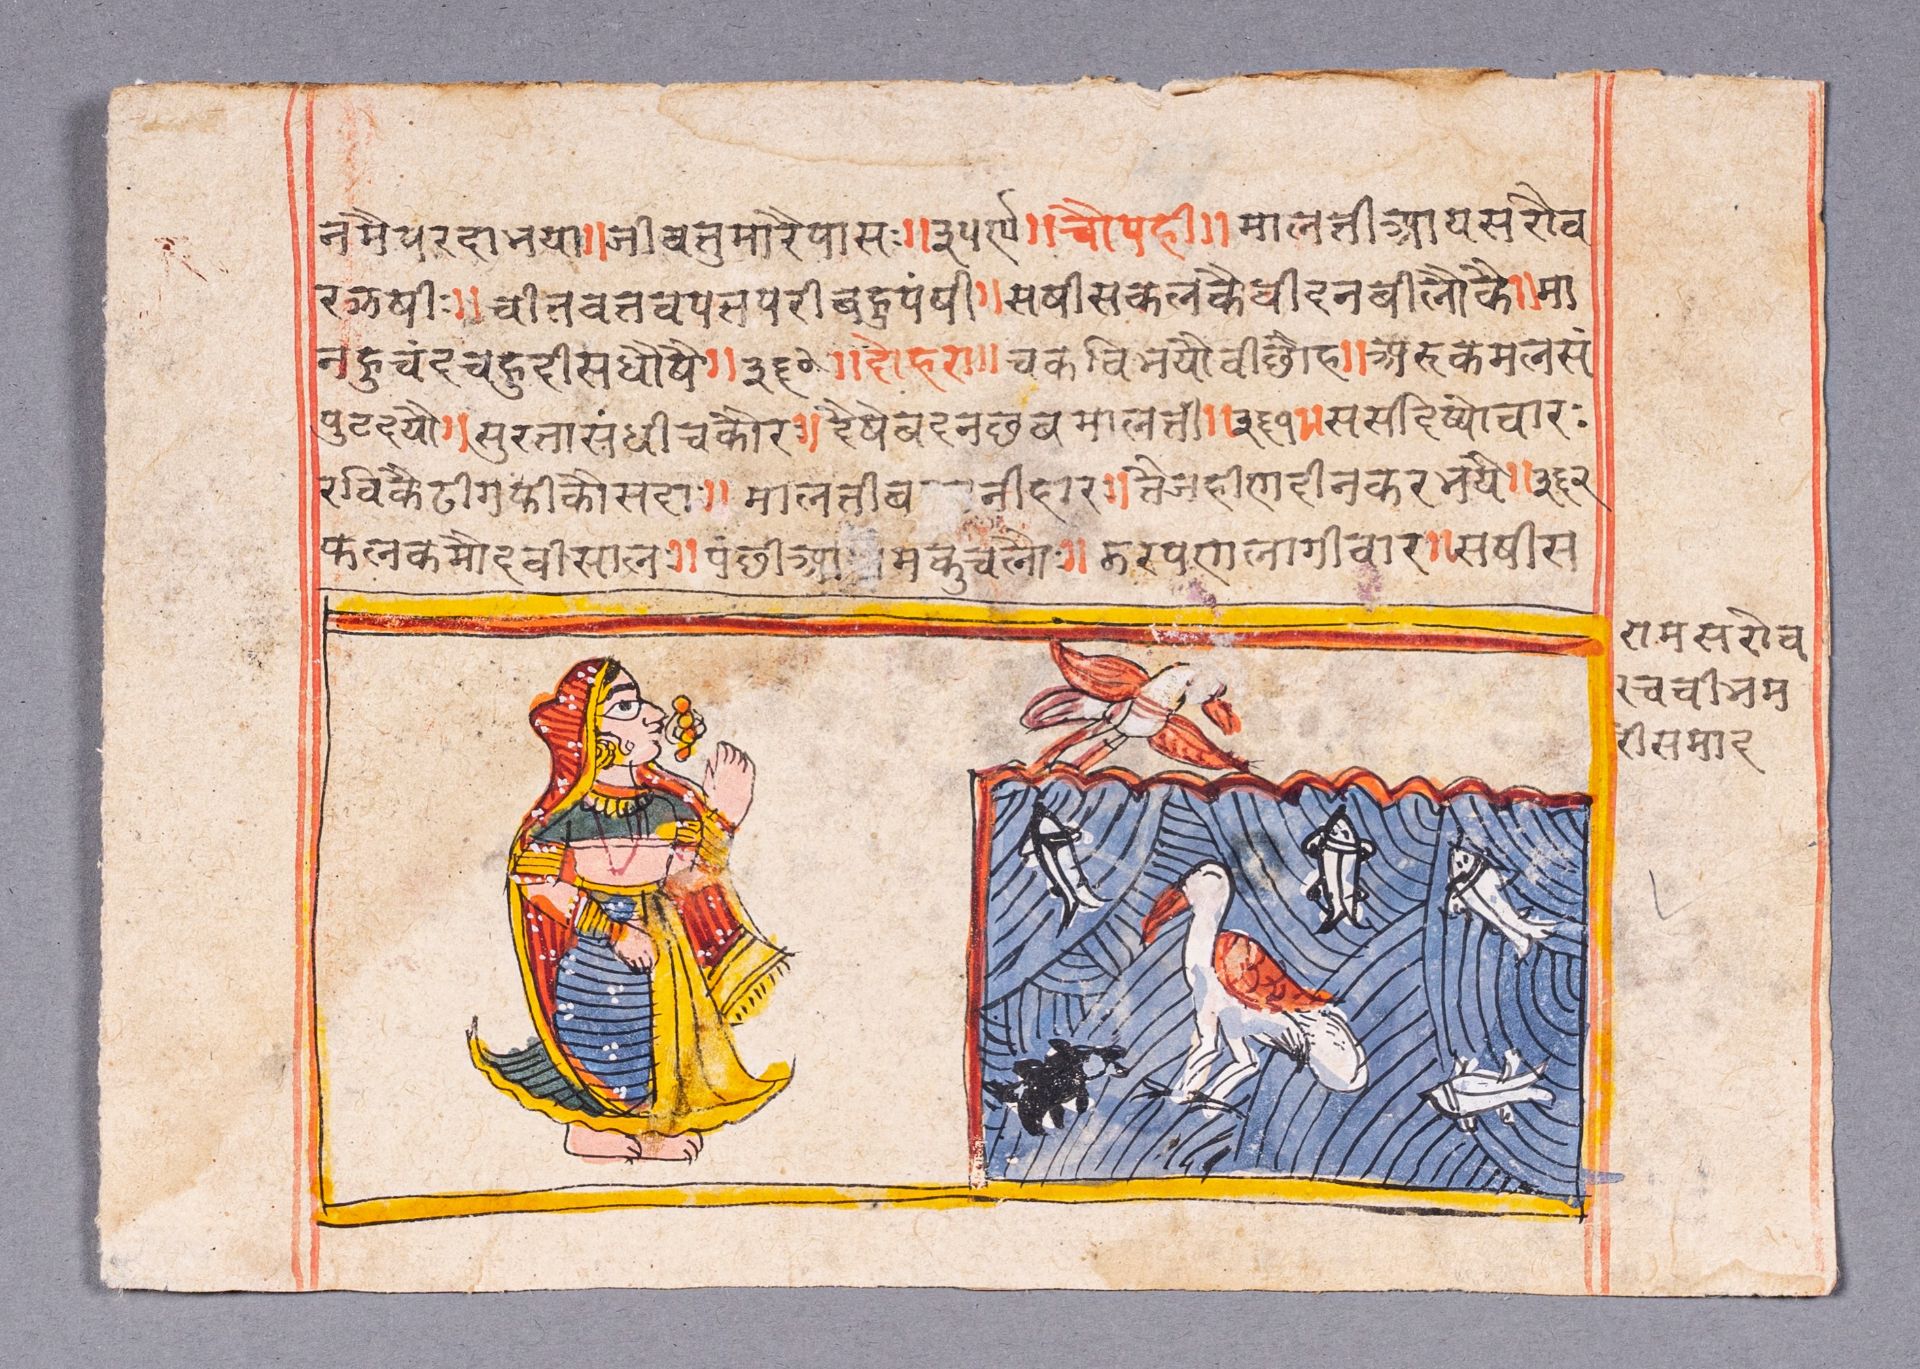 A MANUSCRIPT PAGE WITH RELIGIOUS HINDU TEXTS, c. 1900s